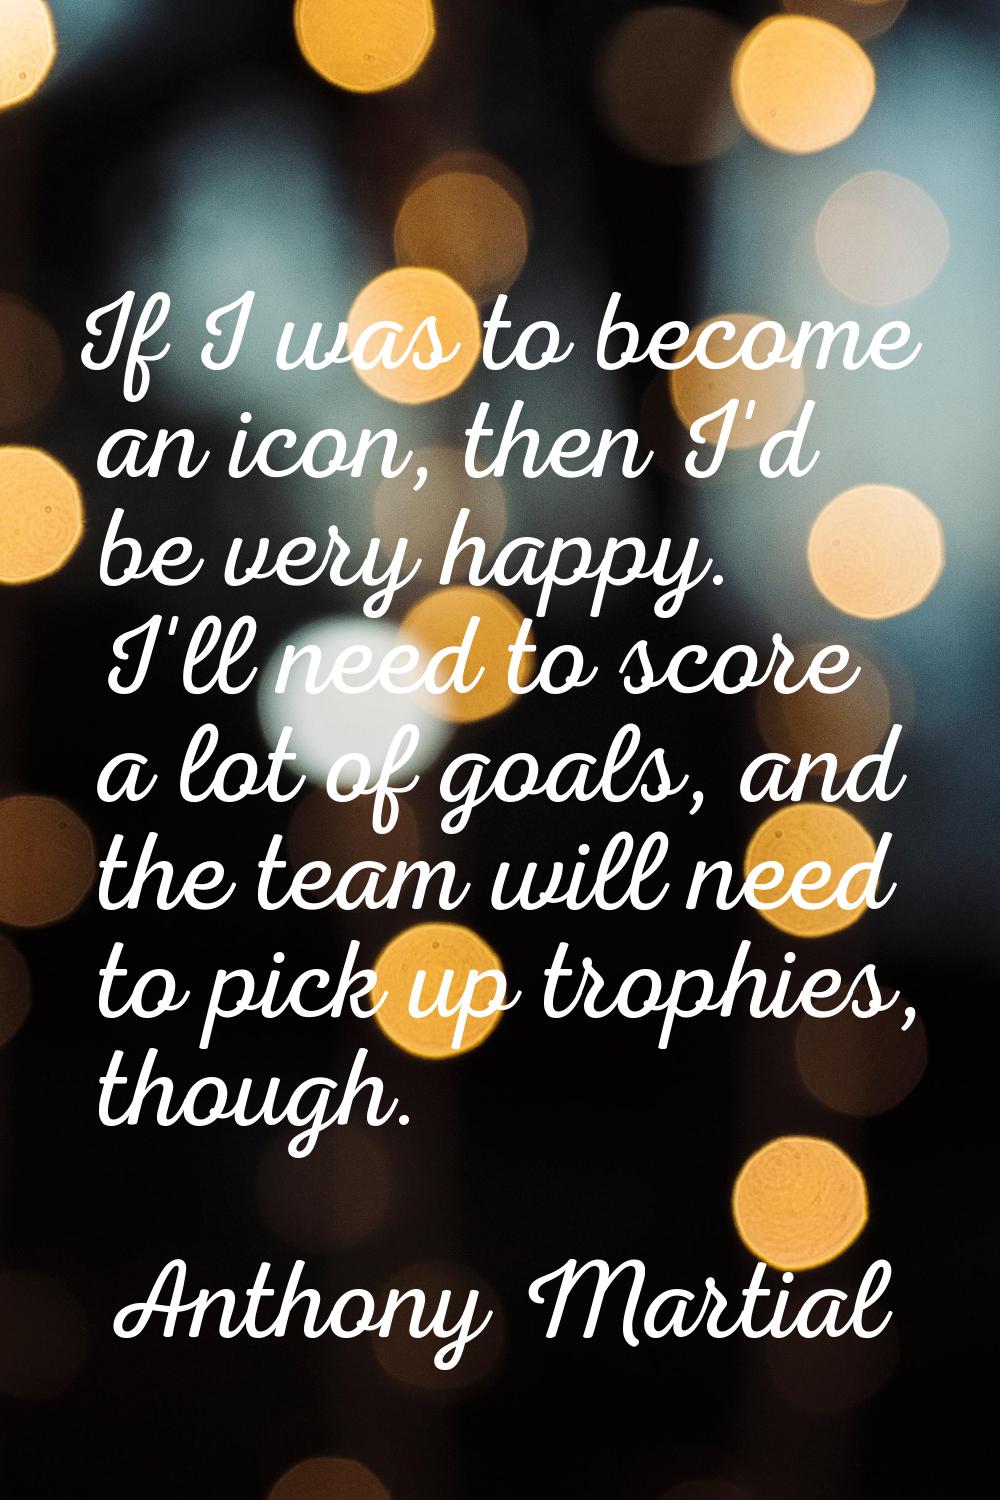 If I was to become an icon, then I'd be very happy. I'll need to score a lot of goals, and the team